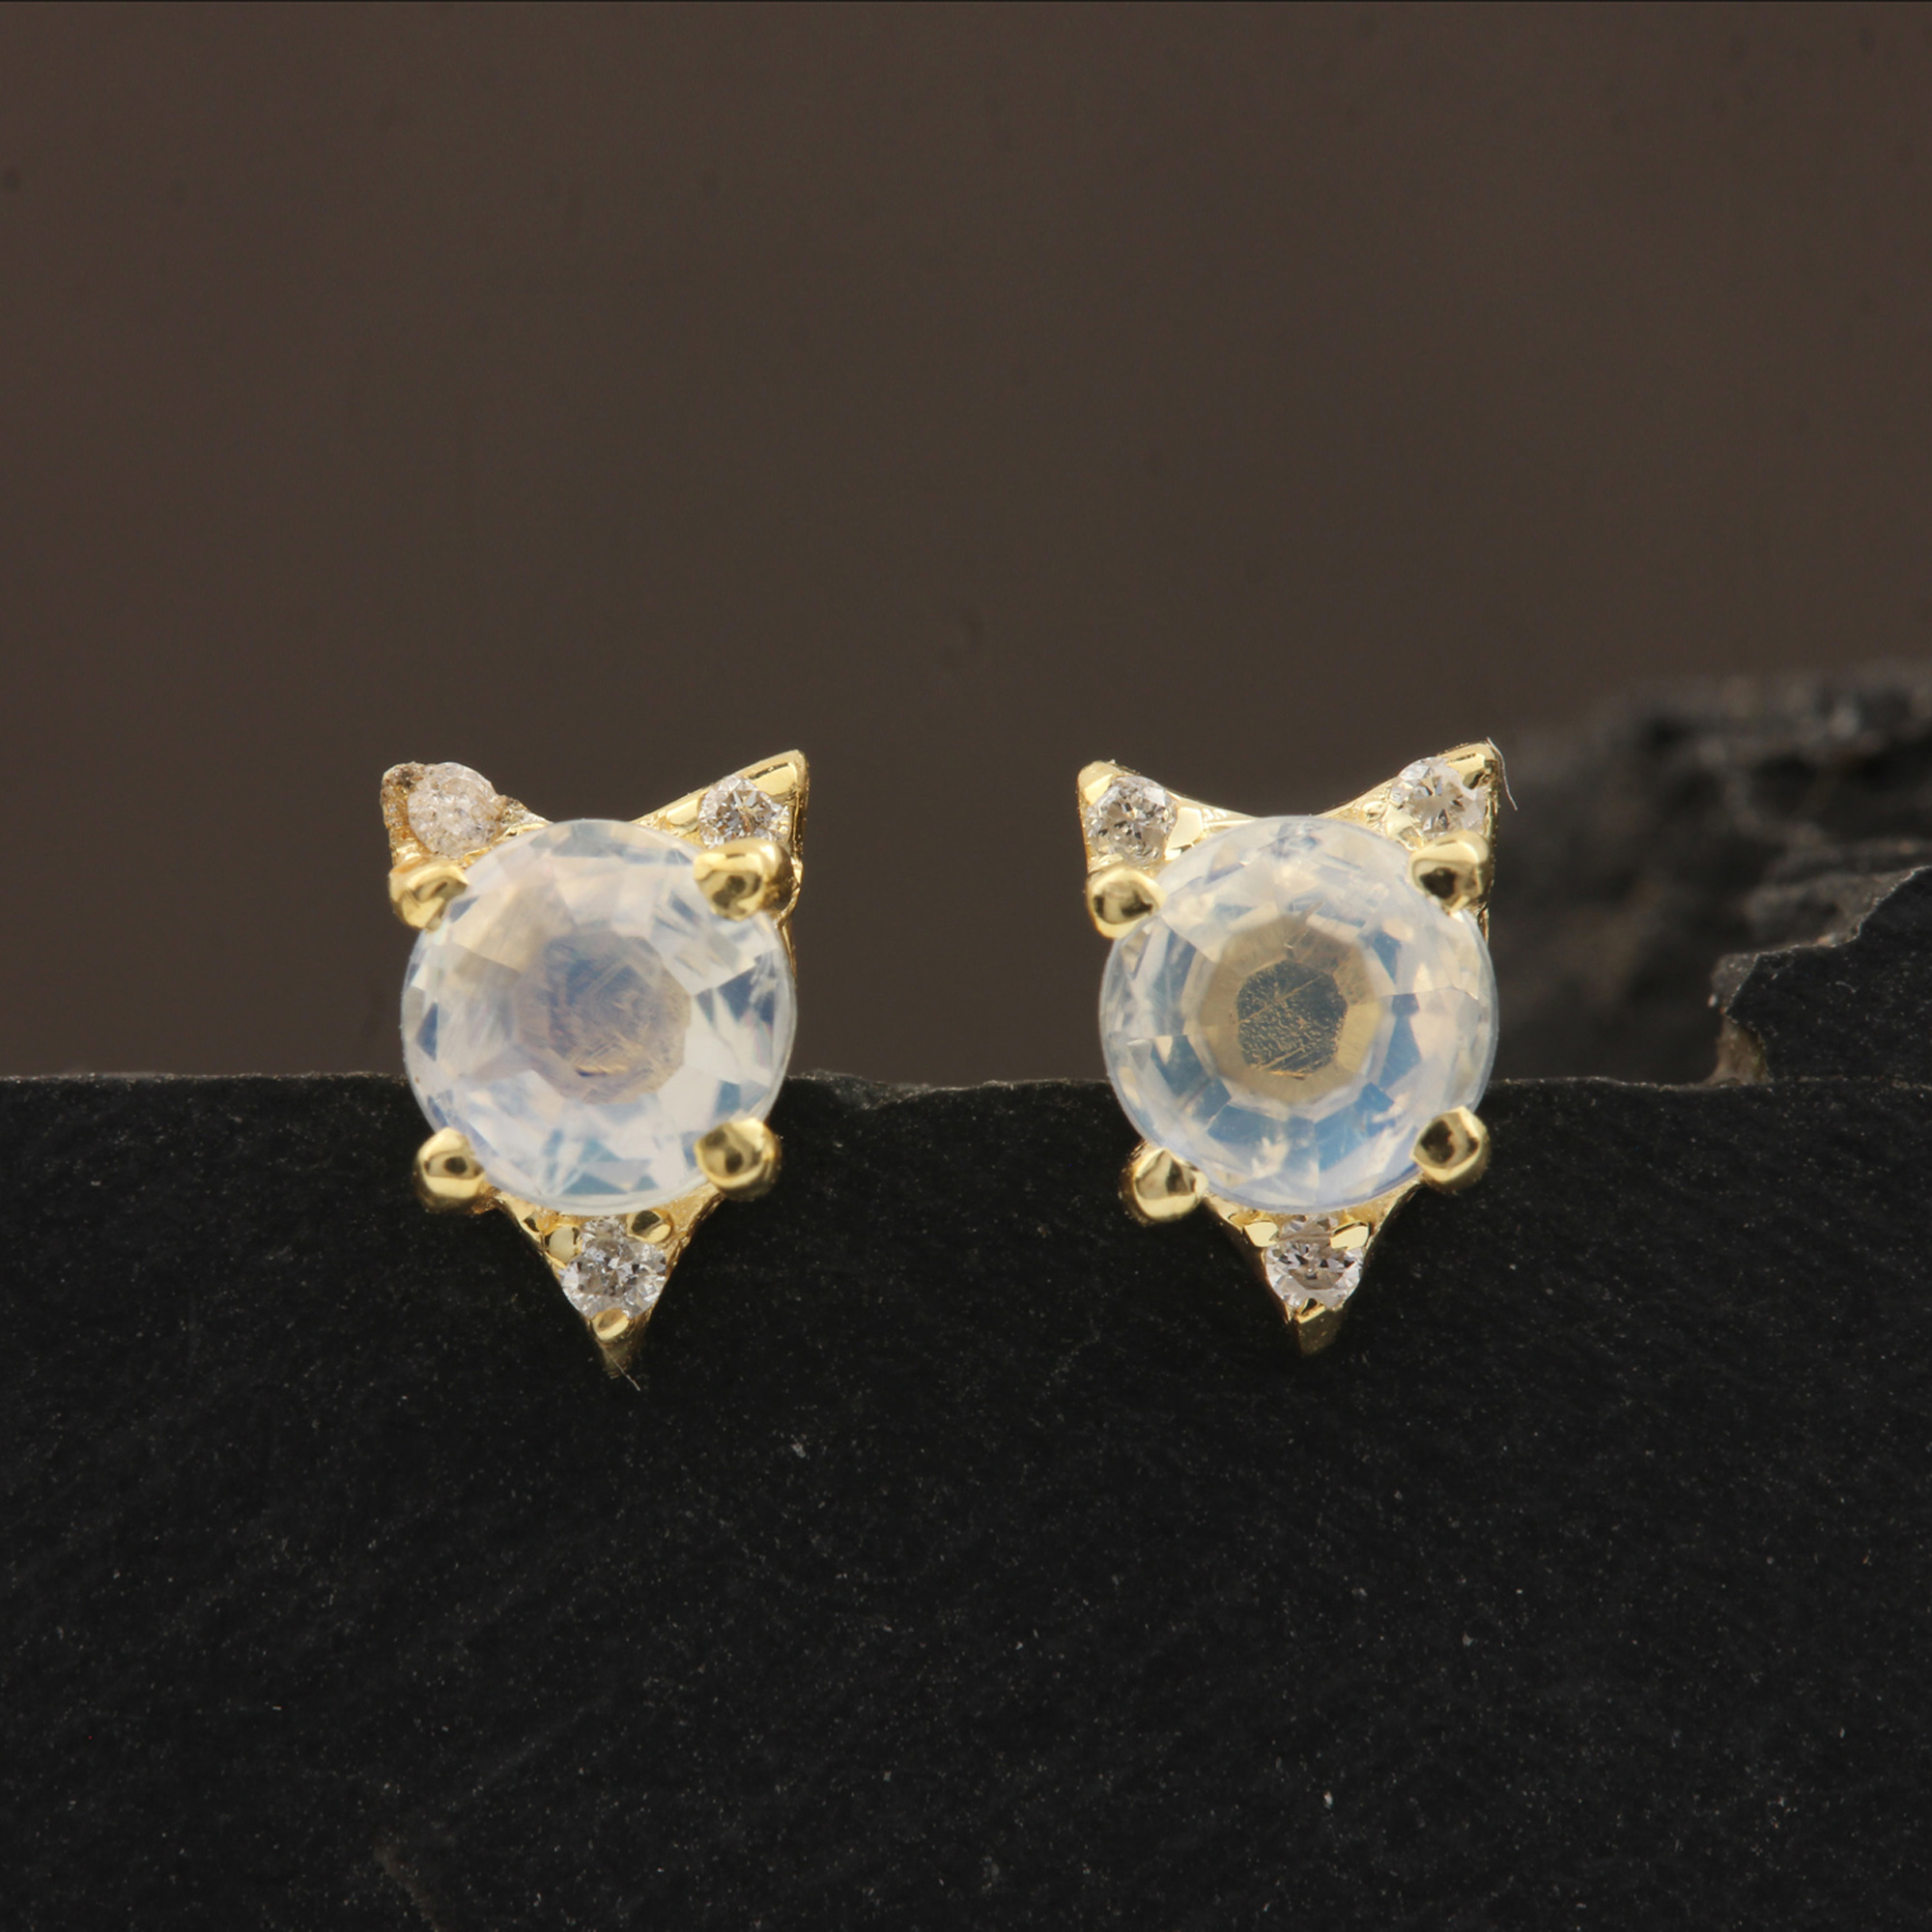 Solitaire Stud Earrings Made in 14k Solid Gold Diamond Rainbow Moonstone